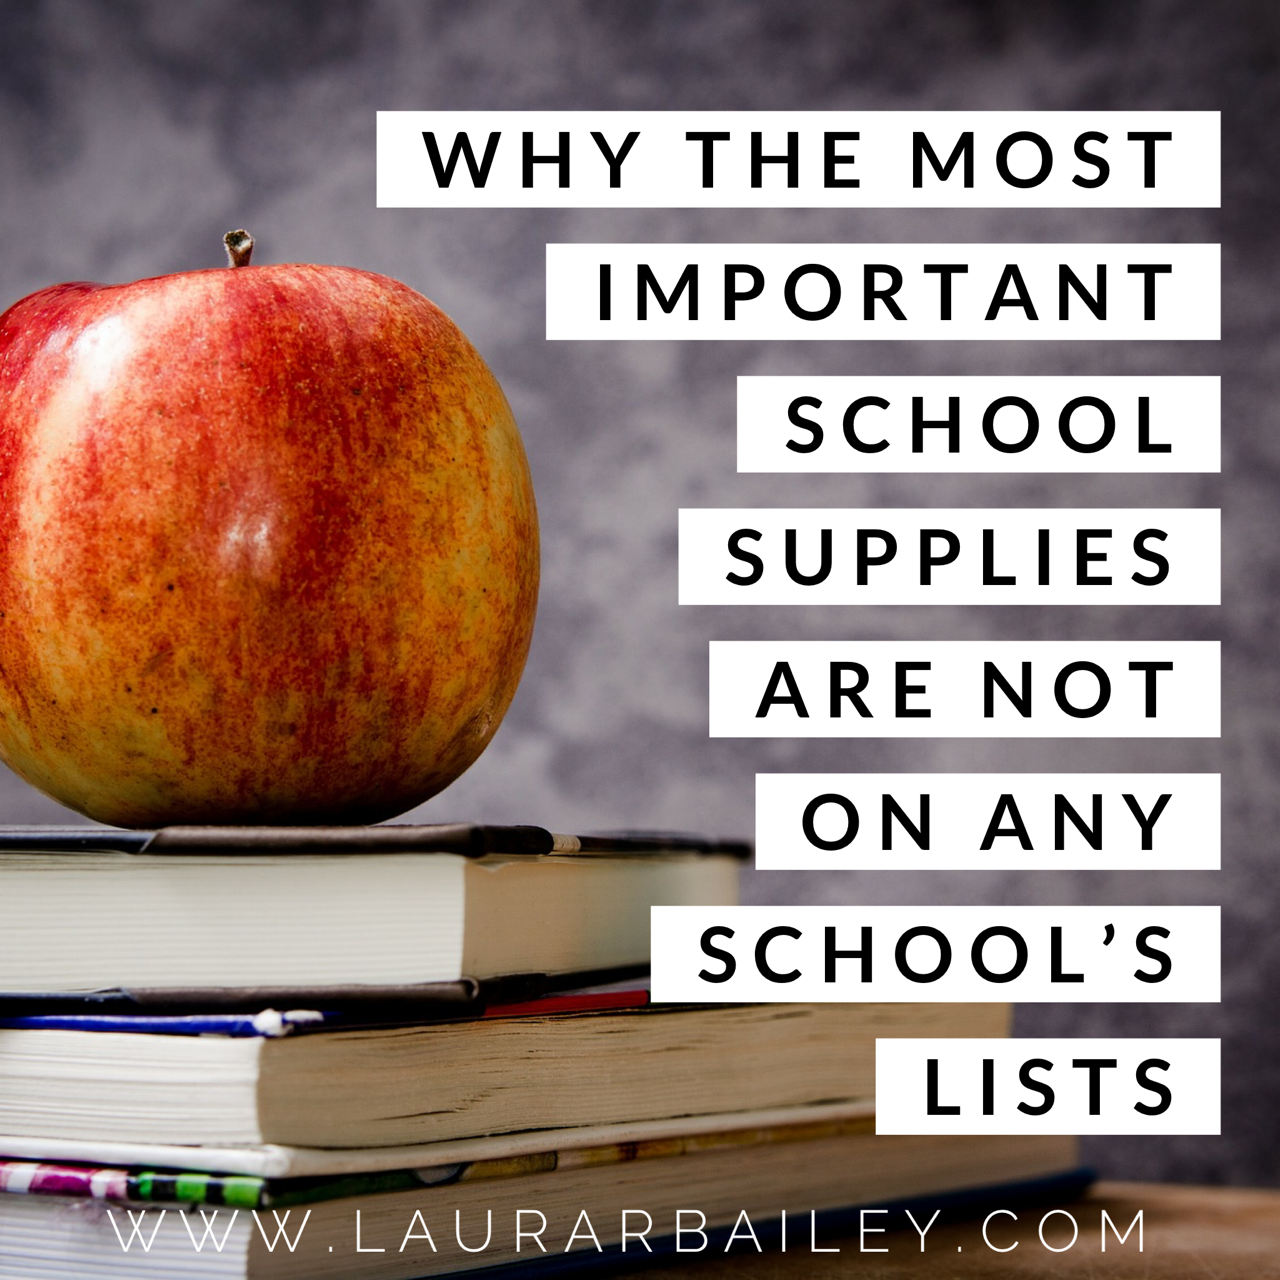 Why the Most Important School Supplies Are Not on Any School’s Lists